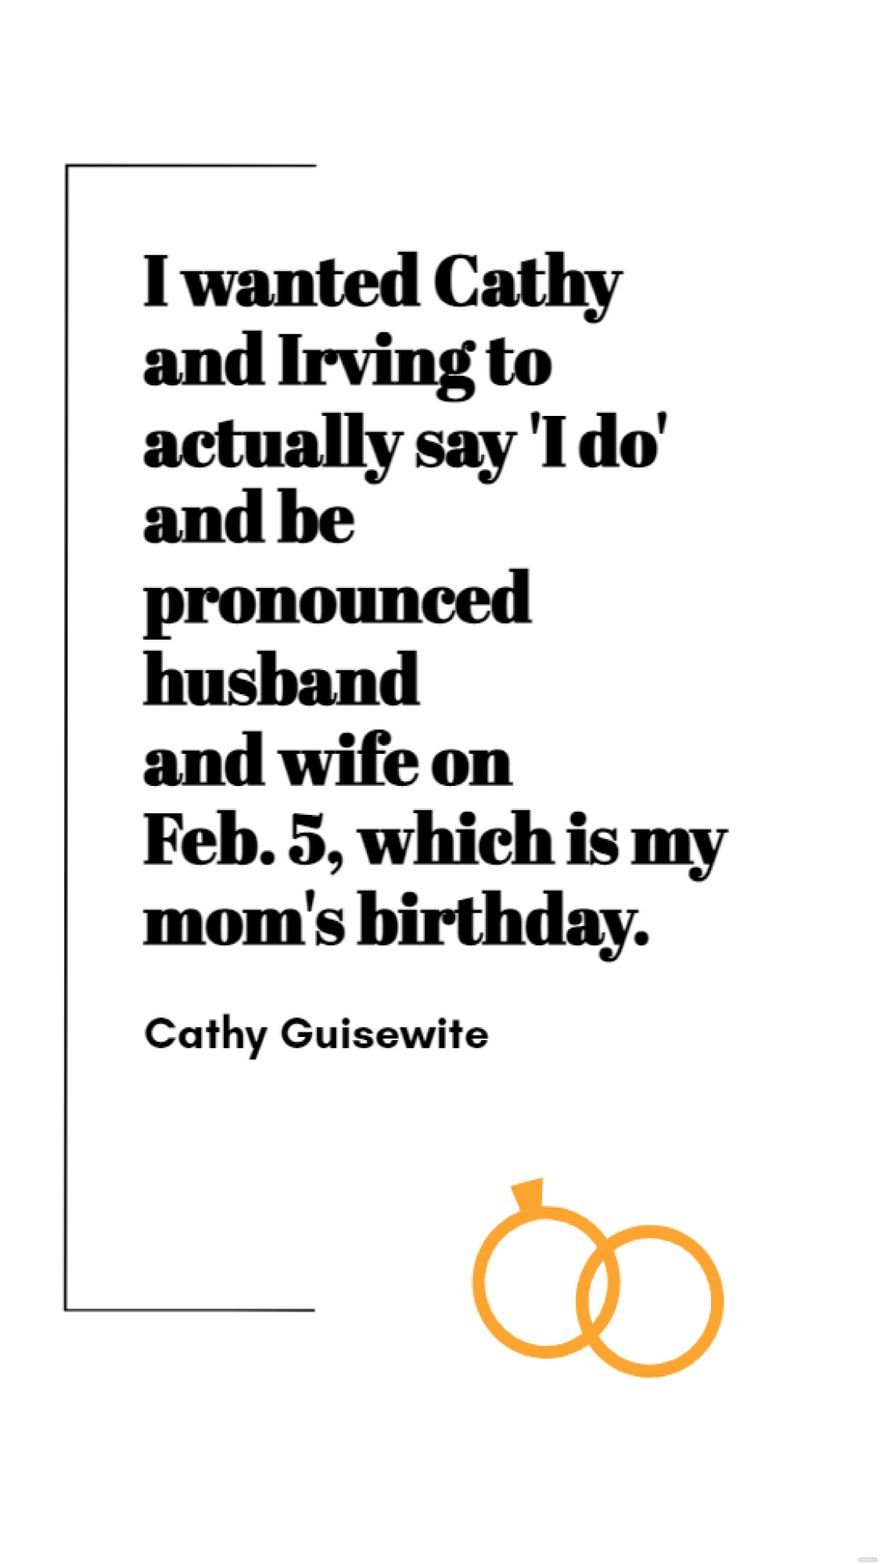 Free Cathy Guisewite - I wanted Cathy and Irving to actually say 'I do' and be pronounced husband and wife on Feb. 5, which is my mom's birthday. in JPG